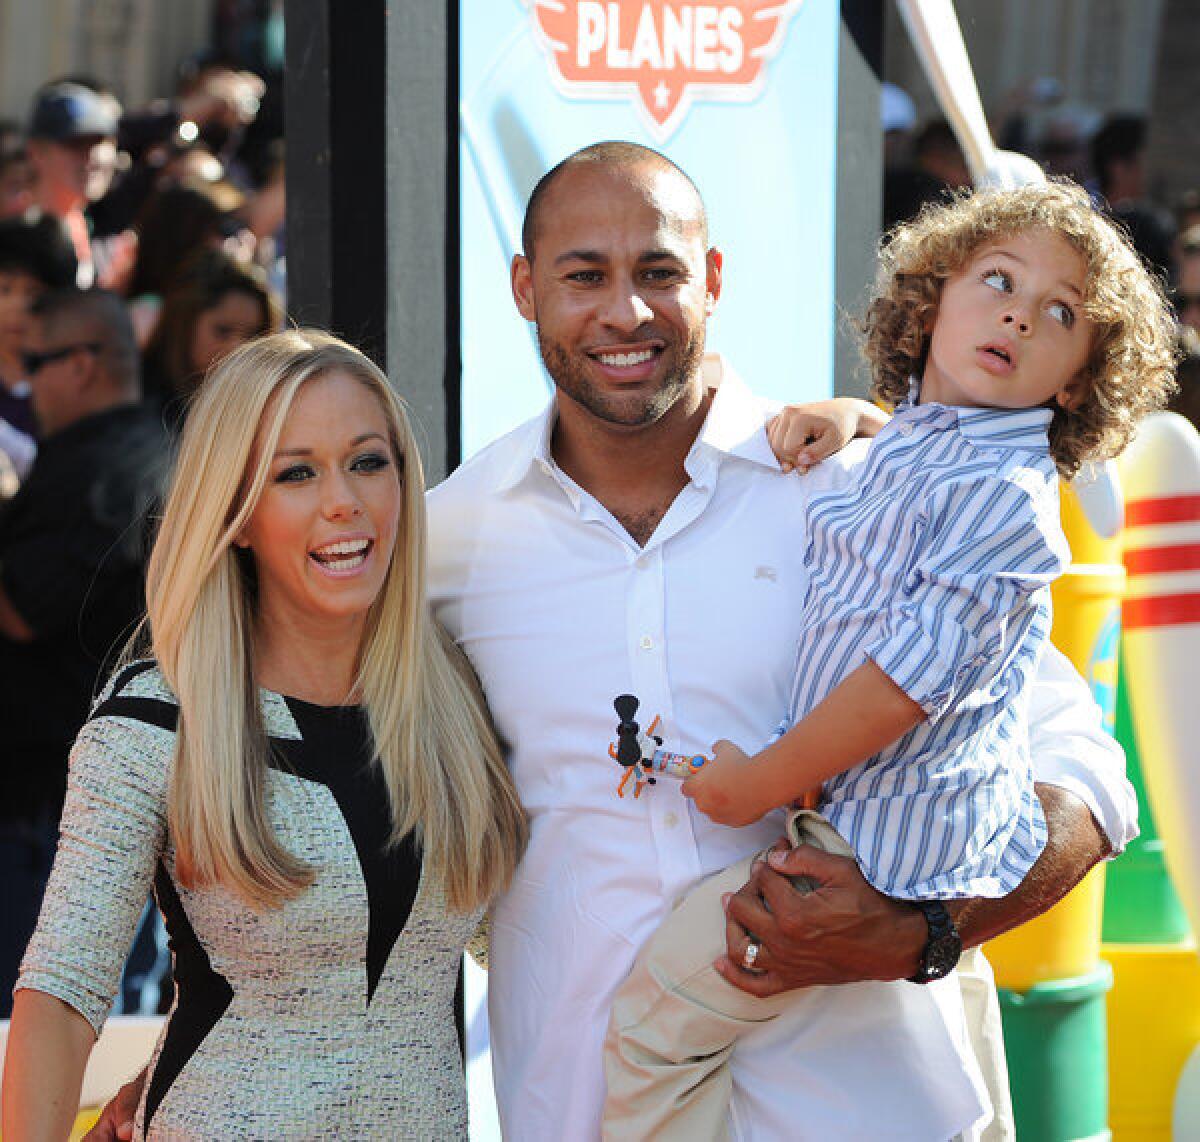 Kendra Wilkinson is reportedly expecting her second child with husband Hank Baskett.